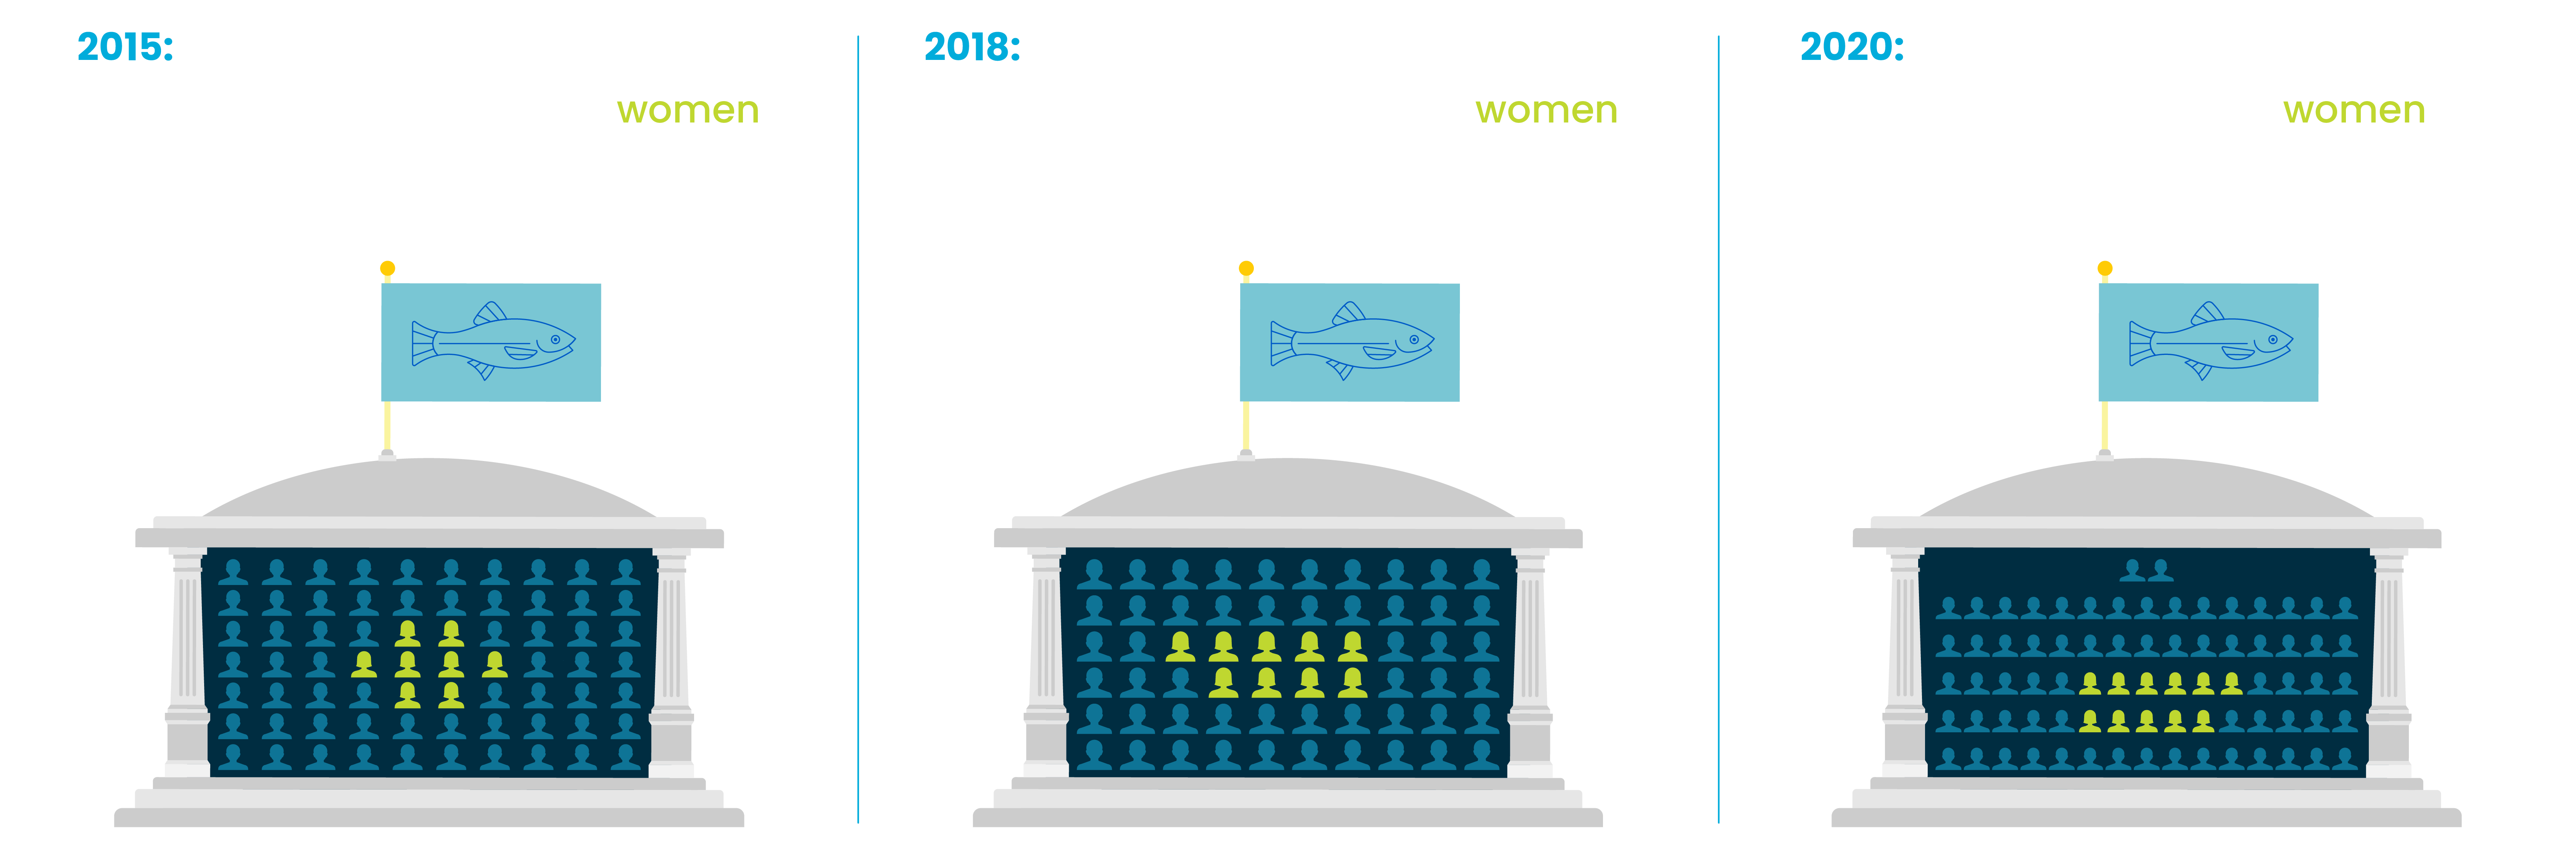 In 2015, women accounted for 13% of fisheries ministers. These figures went up to 15% in 2018, but returned to 13% levels in 2020.